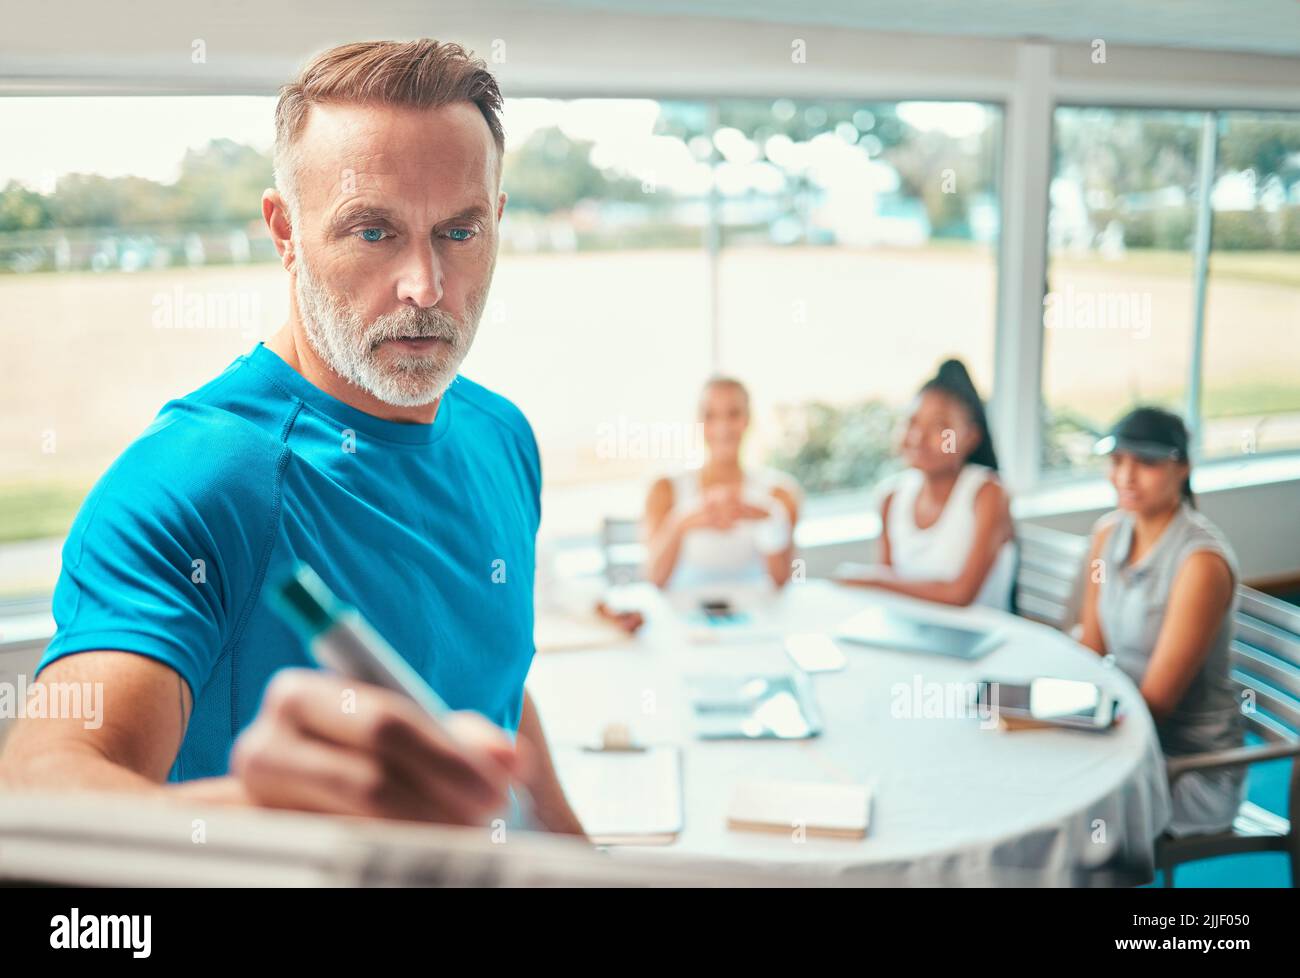 This is the spot where youll win against your opponent. a handsome mature coach standing and writing a game plan while his tennis team listen. Stock Photo